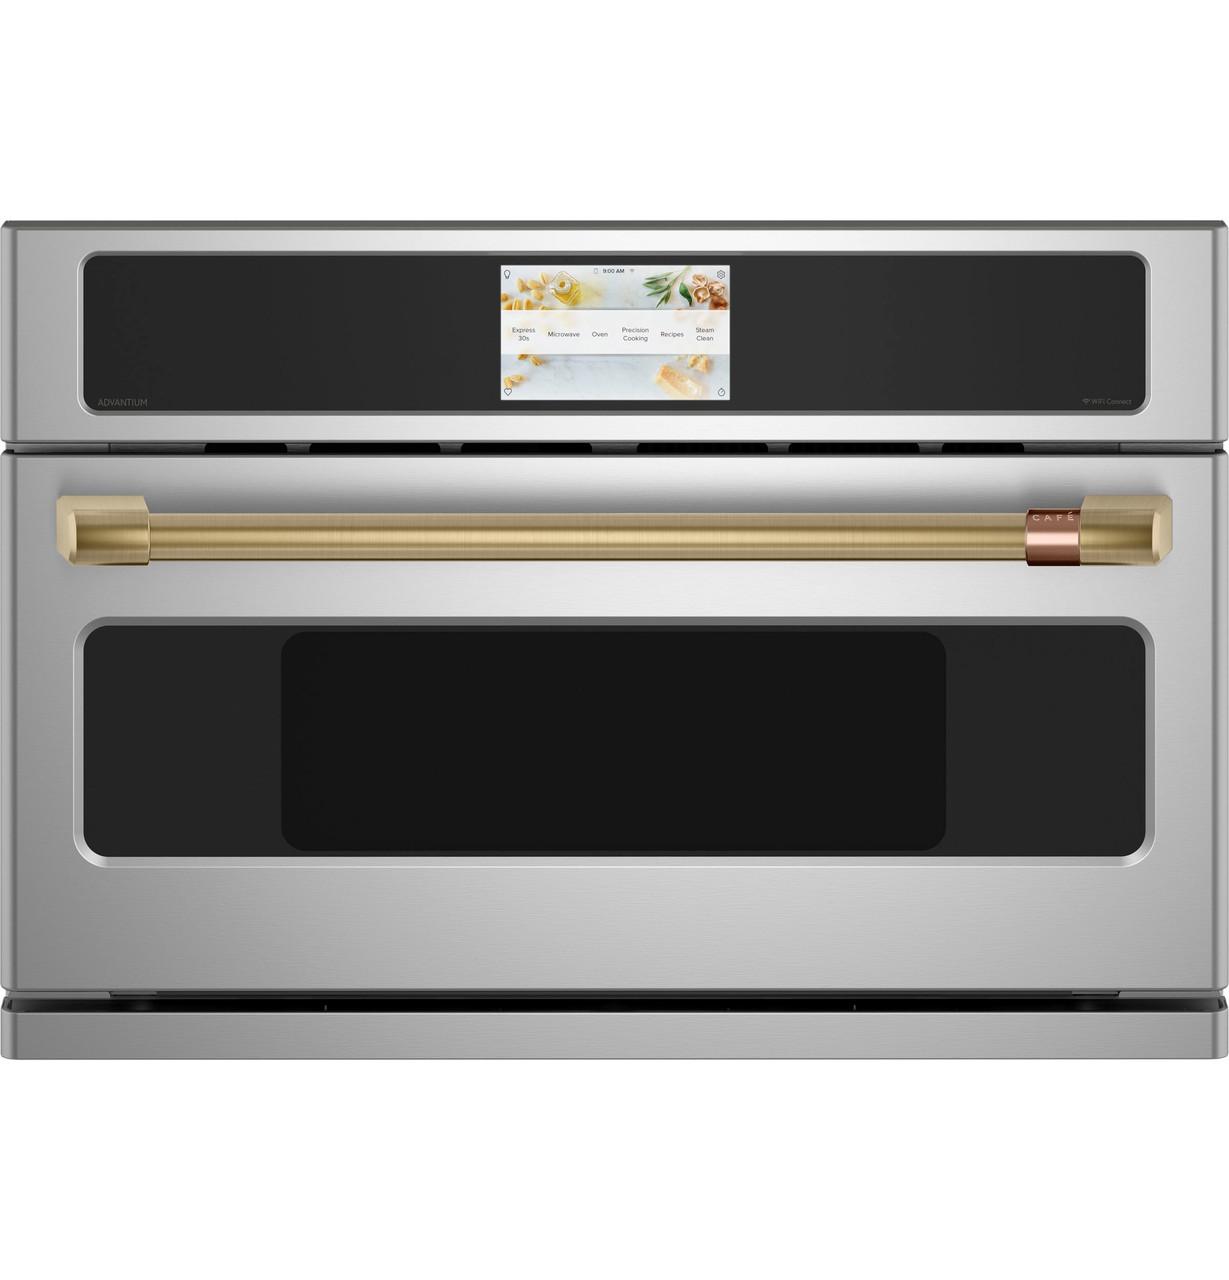 Cafe Caf(eback)™ 30" Smart Five in One Wall Oven with 240V Advantium® Technology